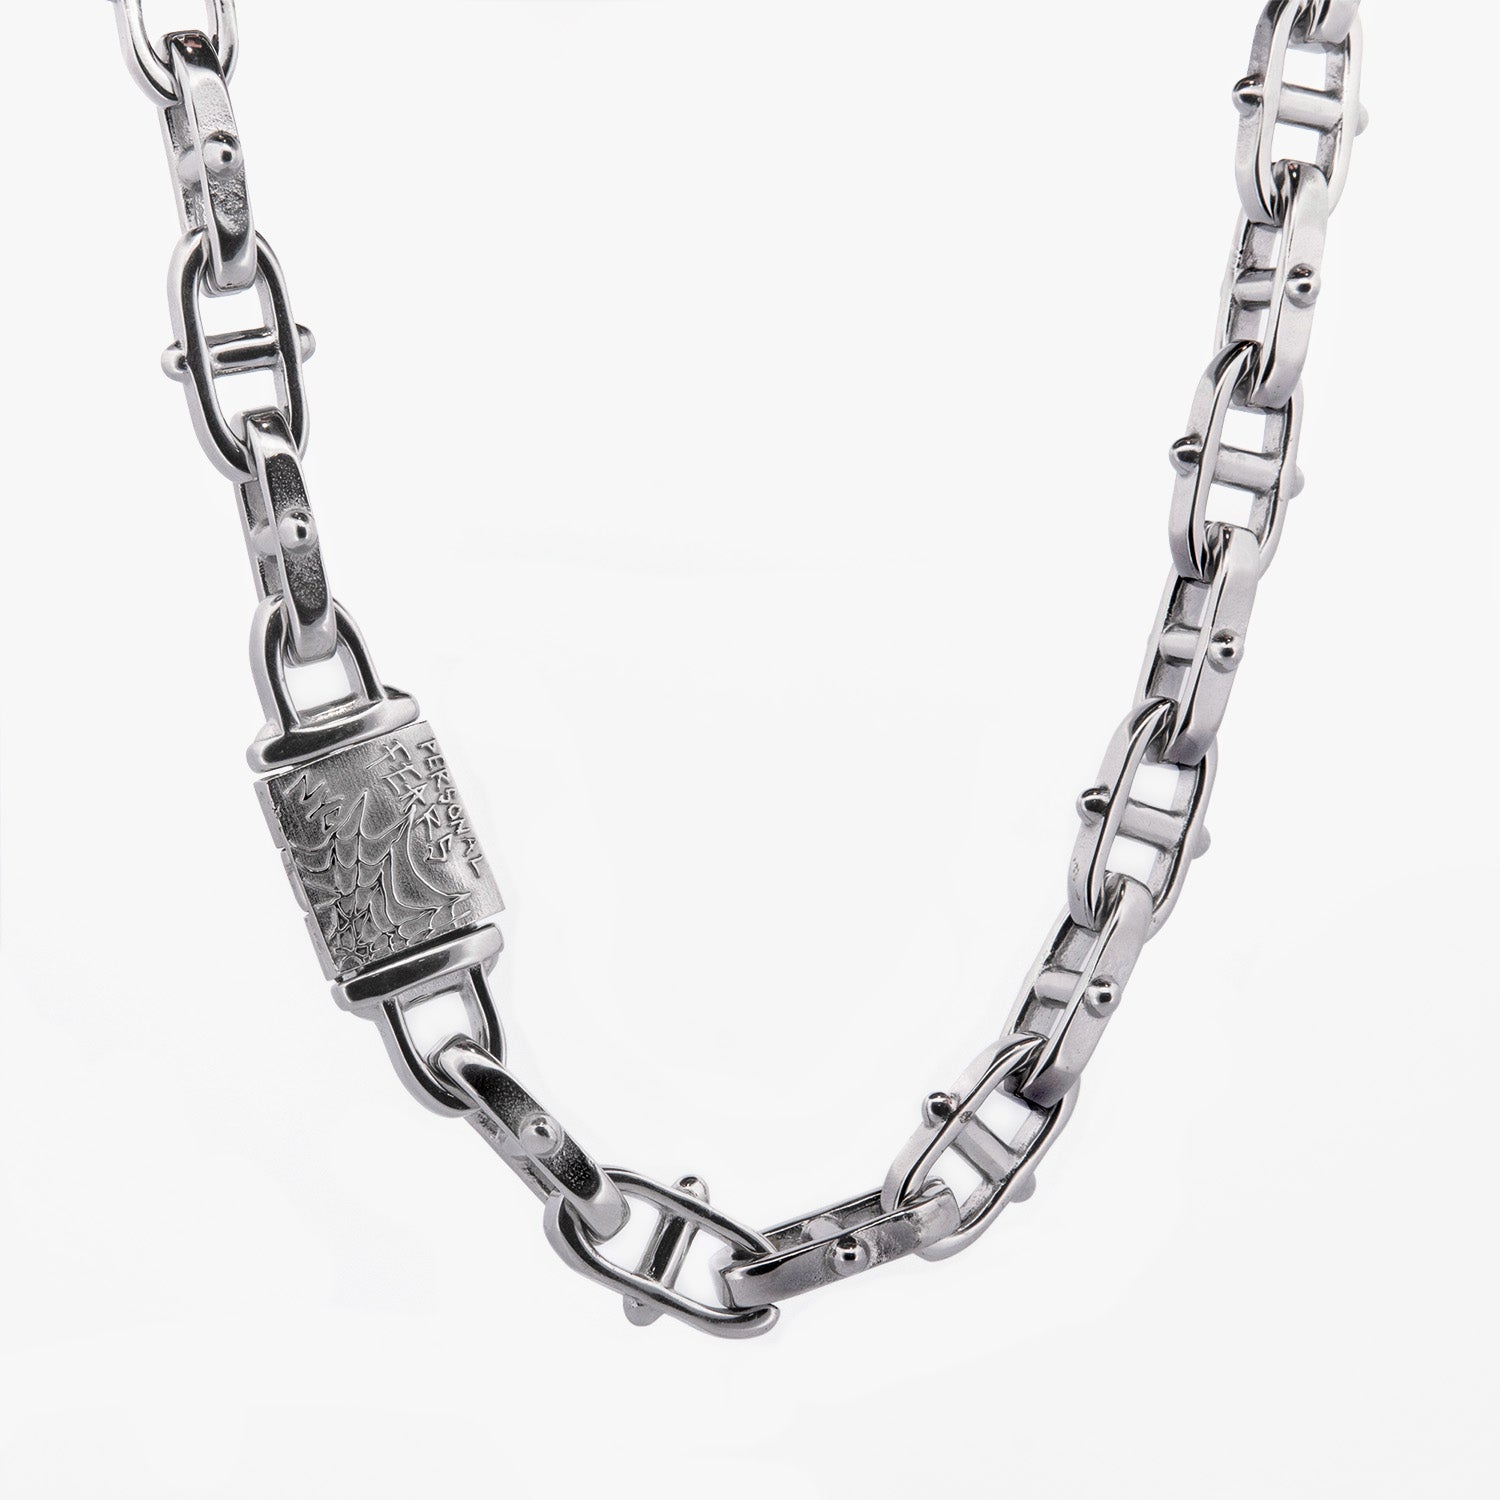 Personal Fears  Stainless Steel Chains, Necklaces, & Pendants